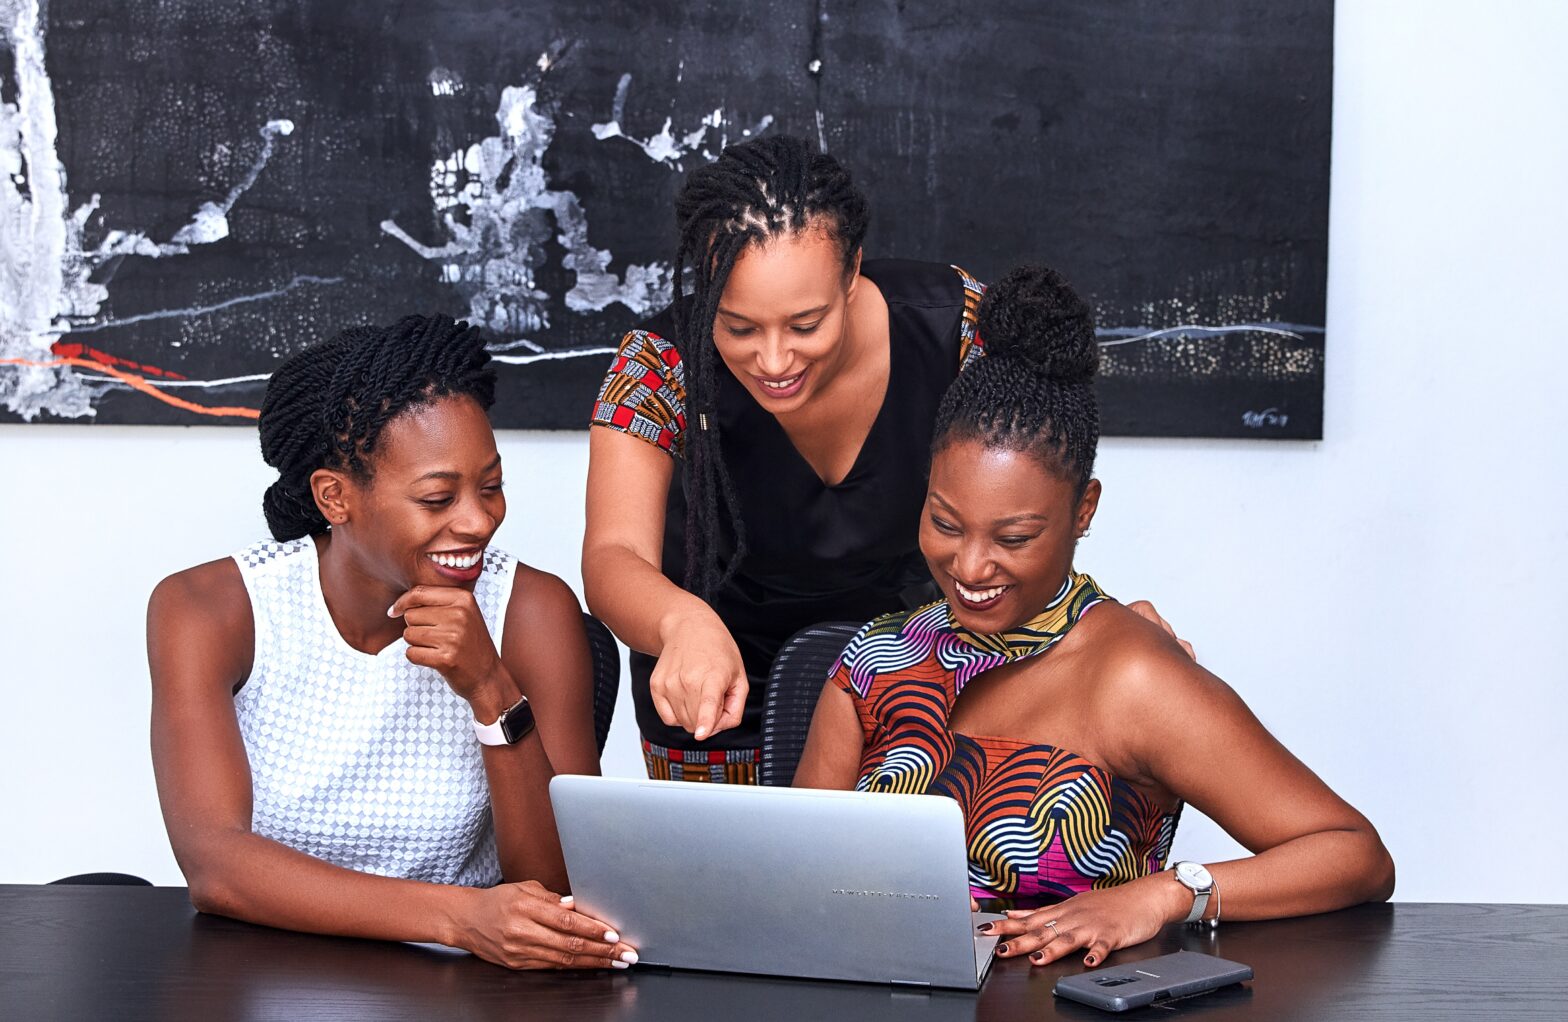 Black Women-Focused Media Organizations You Should Know About